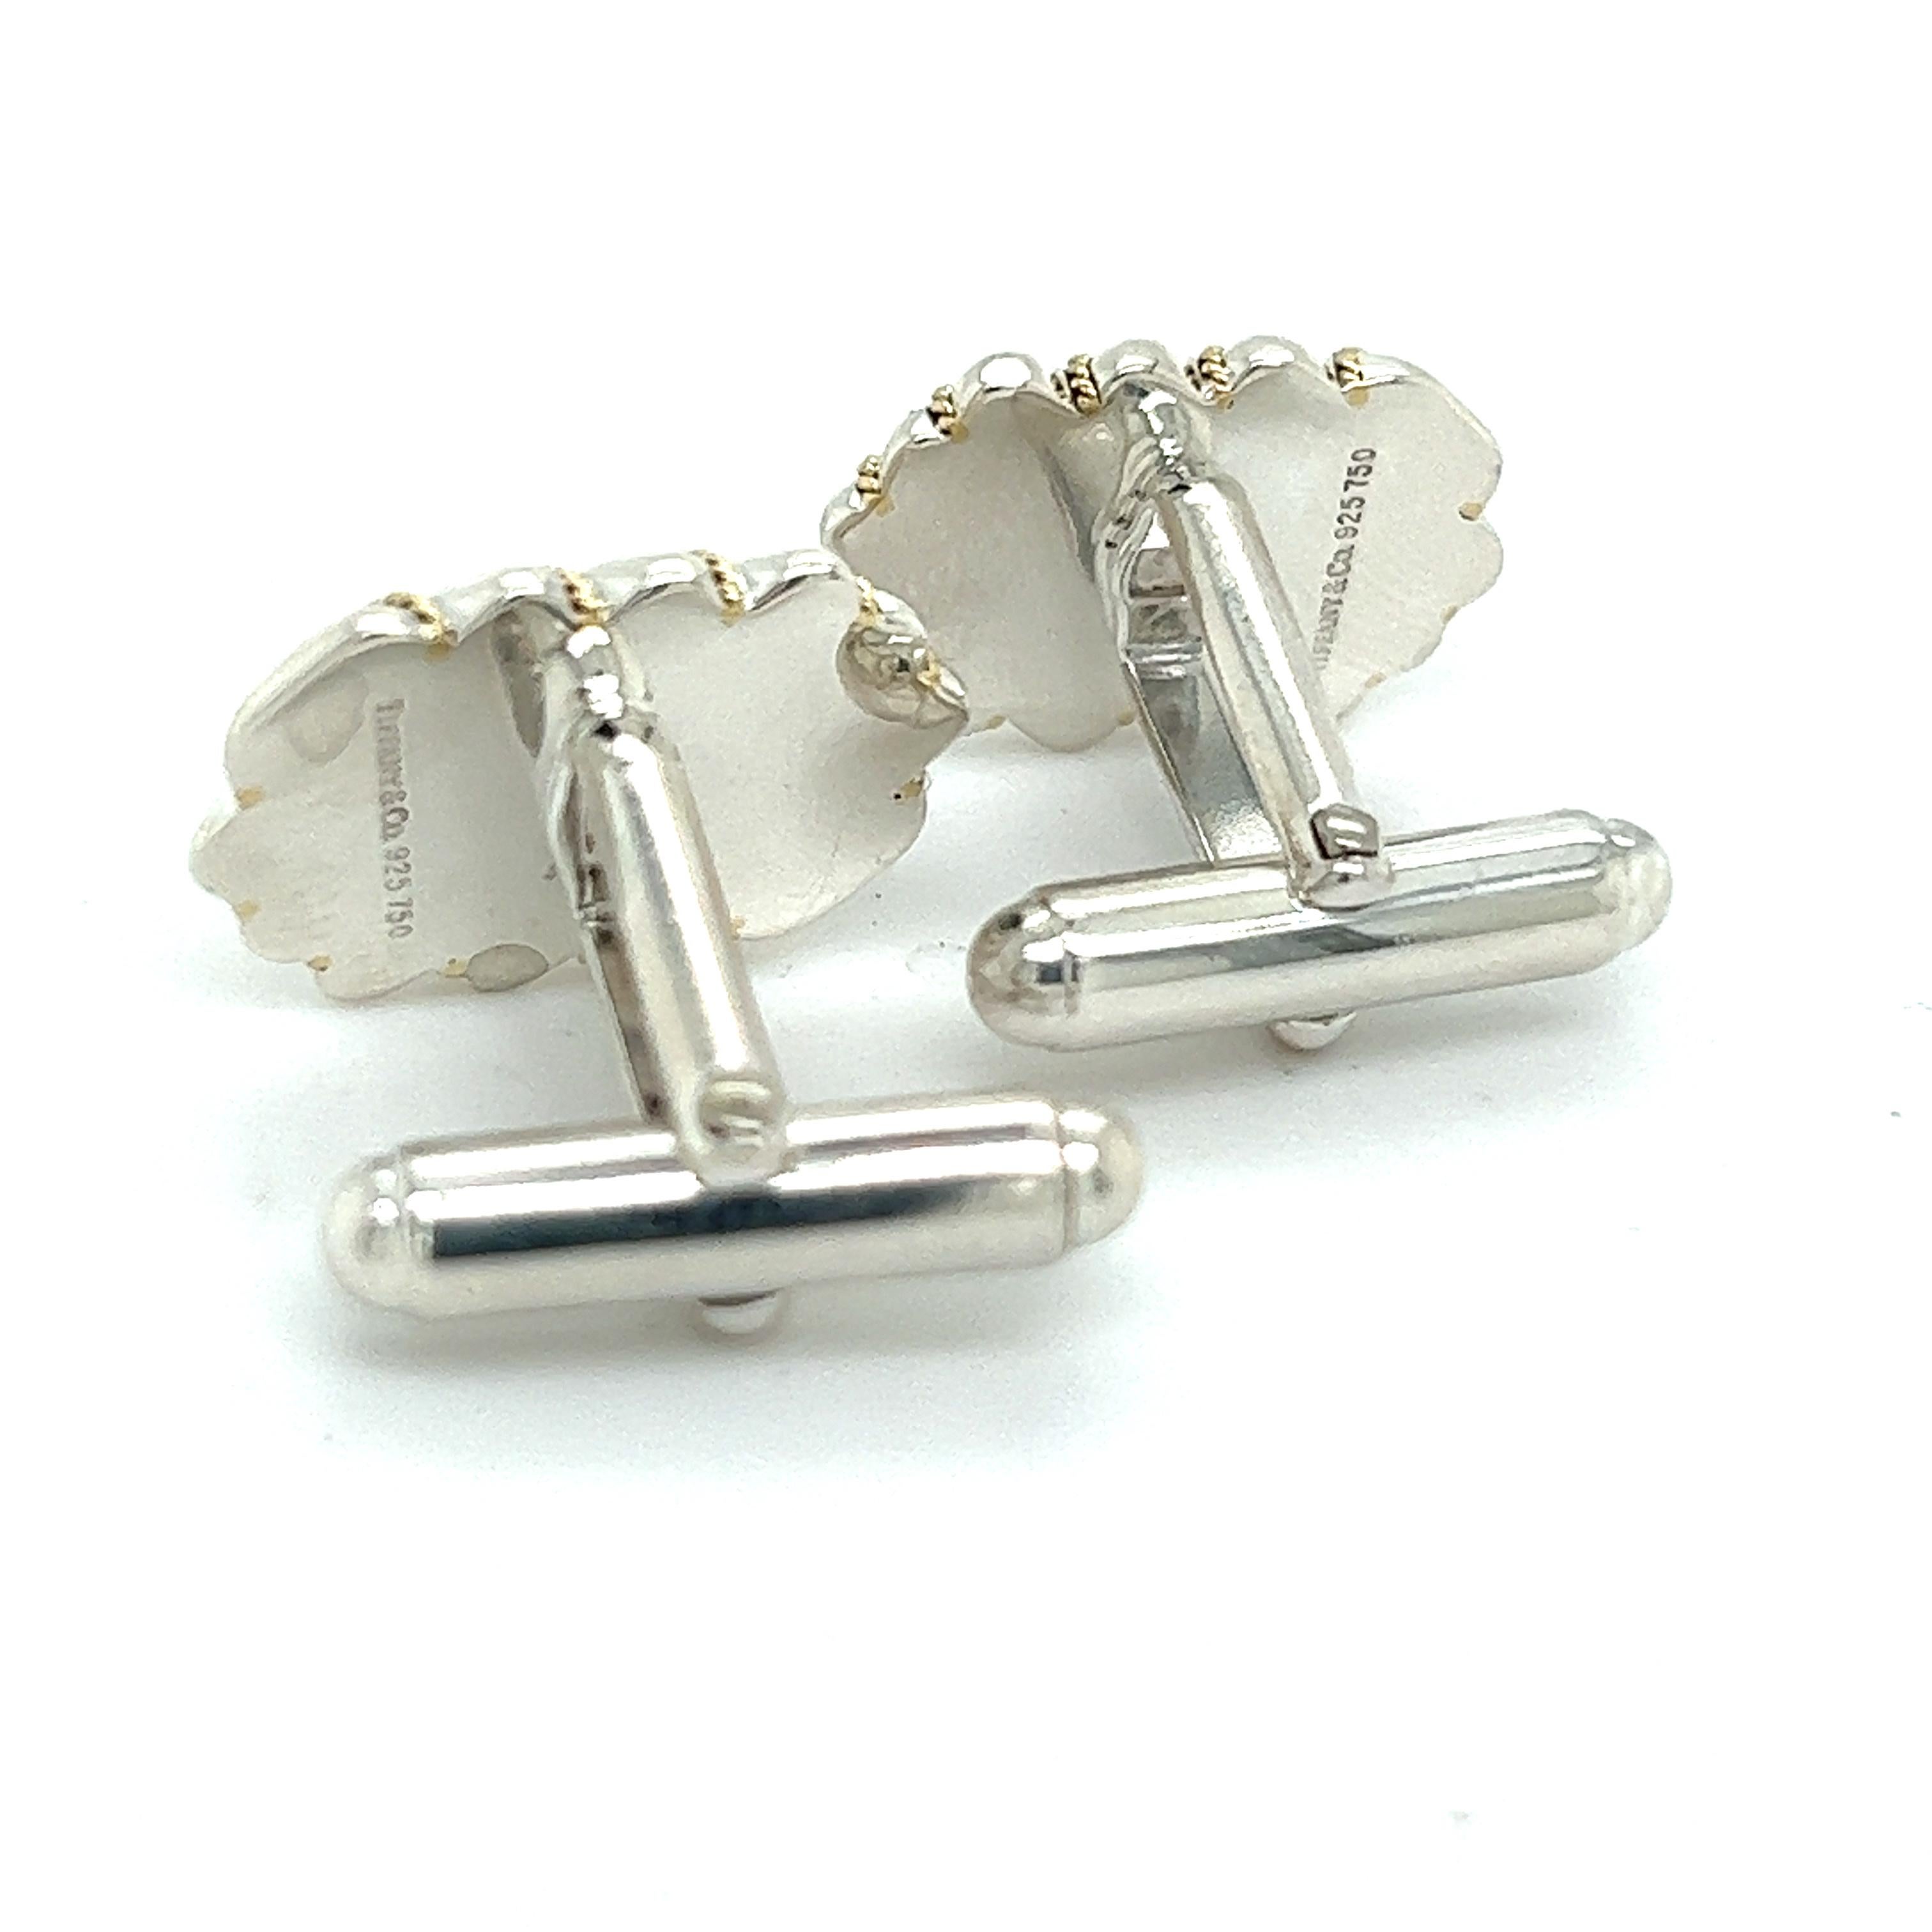 Tiffany & Co Estate Cufflinks 18k Y Gold + Sterling Silver In Good Condition For Sale In Brooklyn, NY